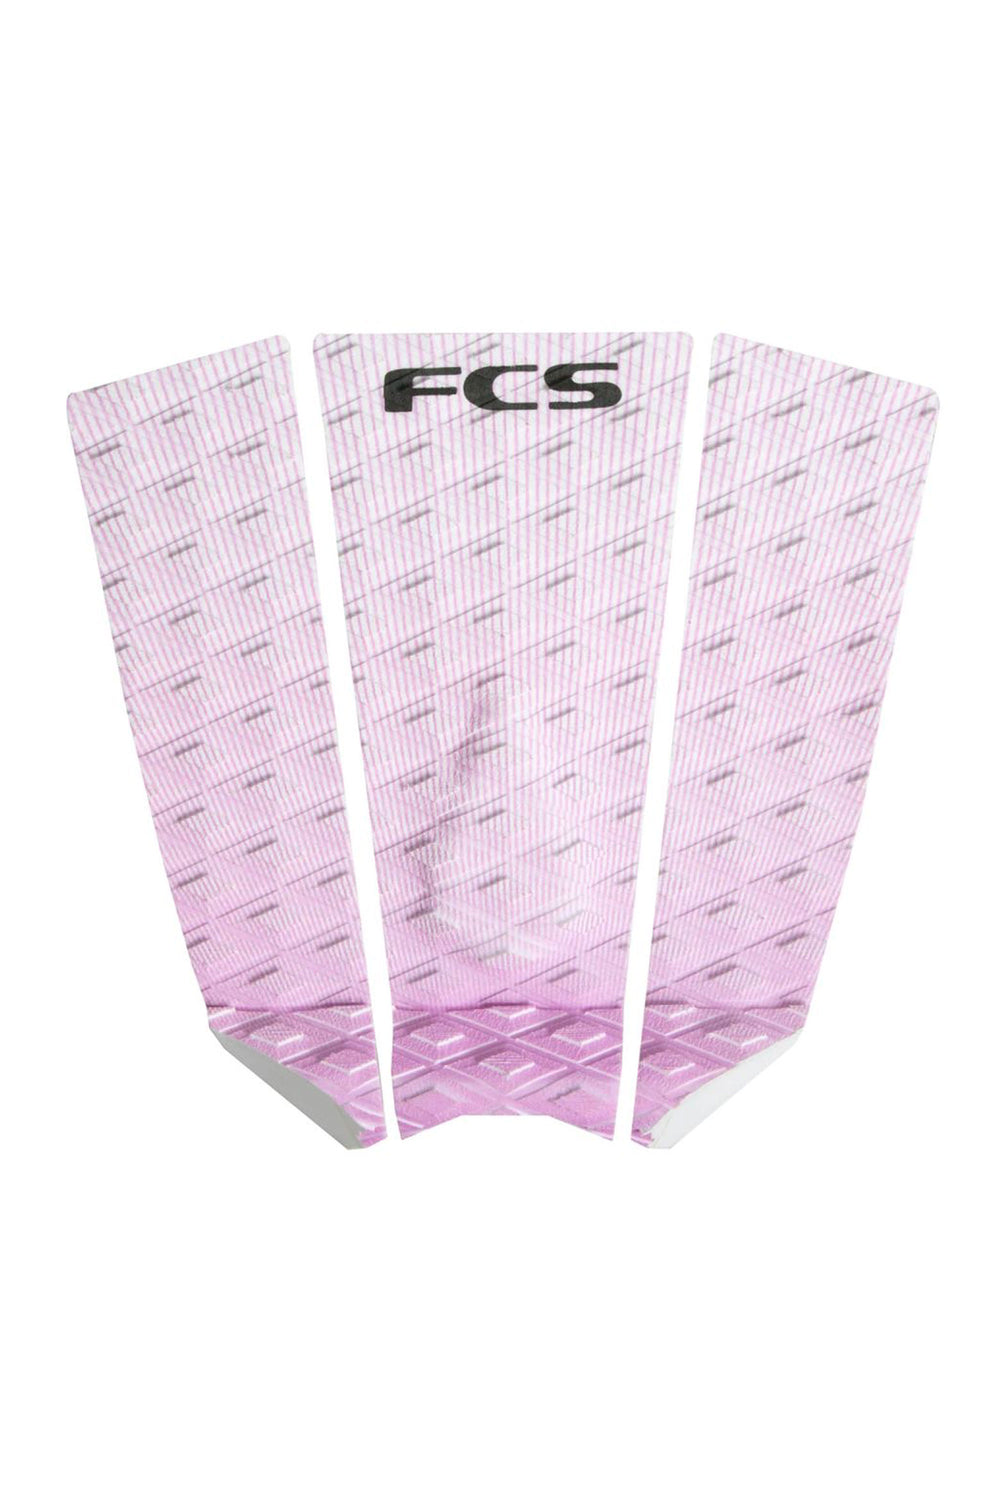 Pukas-Surf-Shop-grip-fcs-tail-pad-sally-fitzgibbons-white-dusty-pink